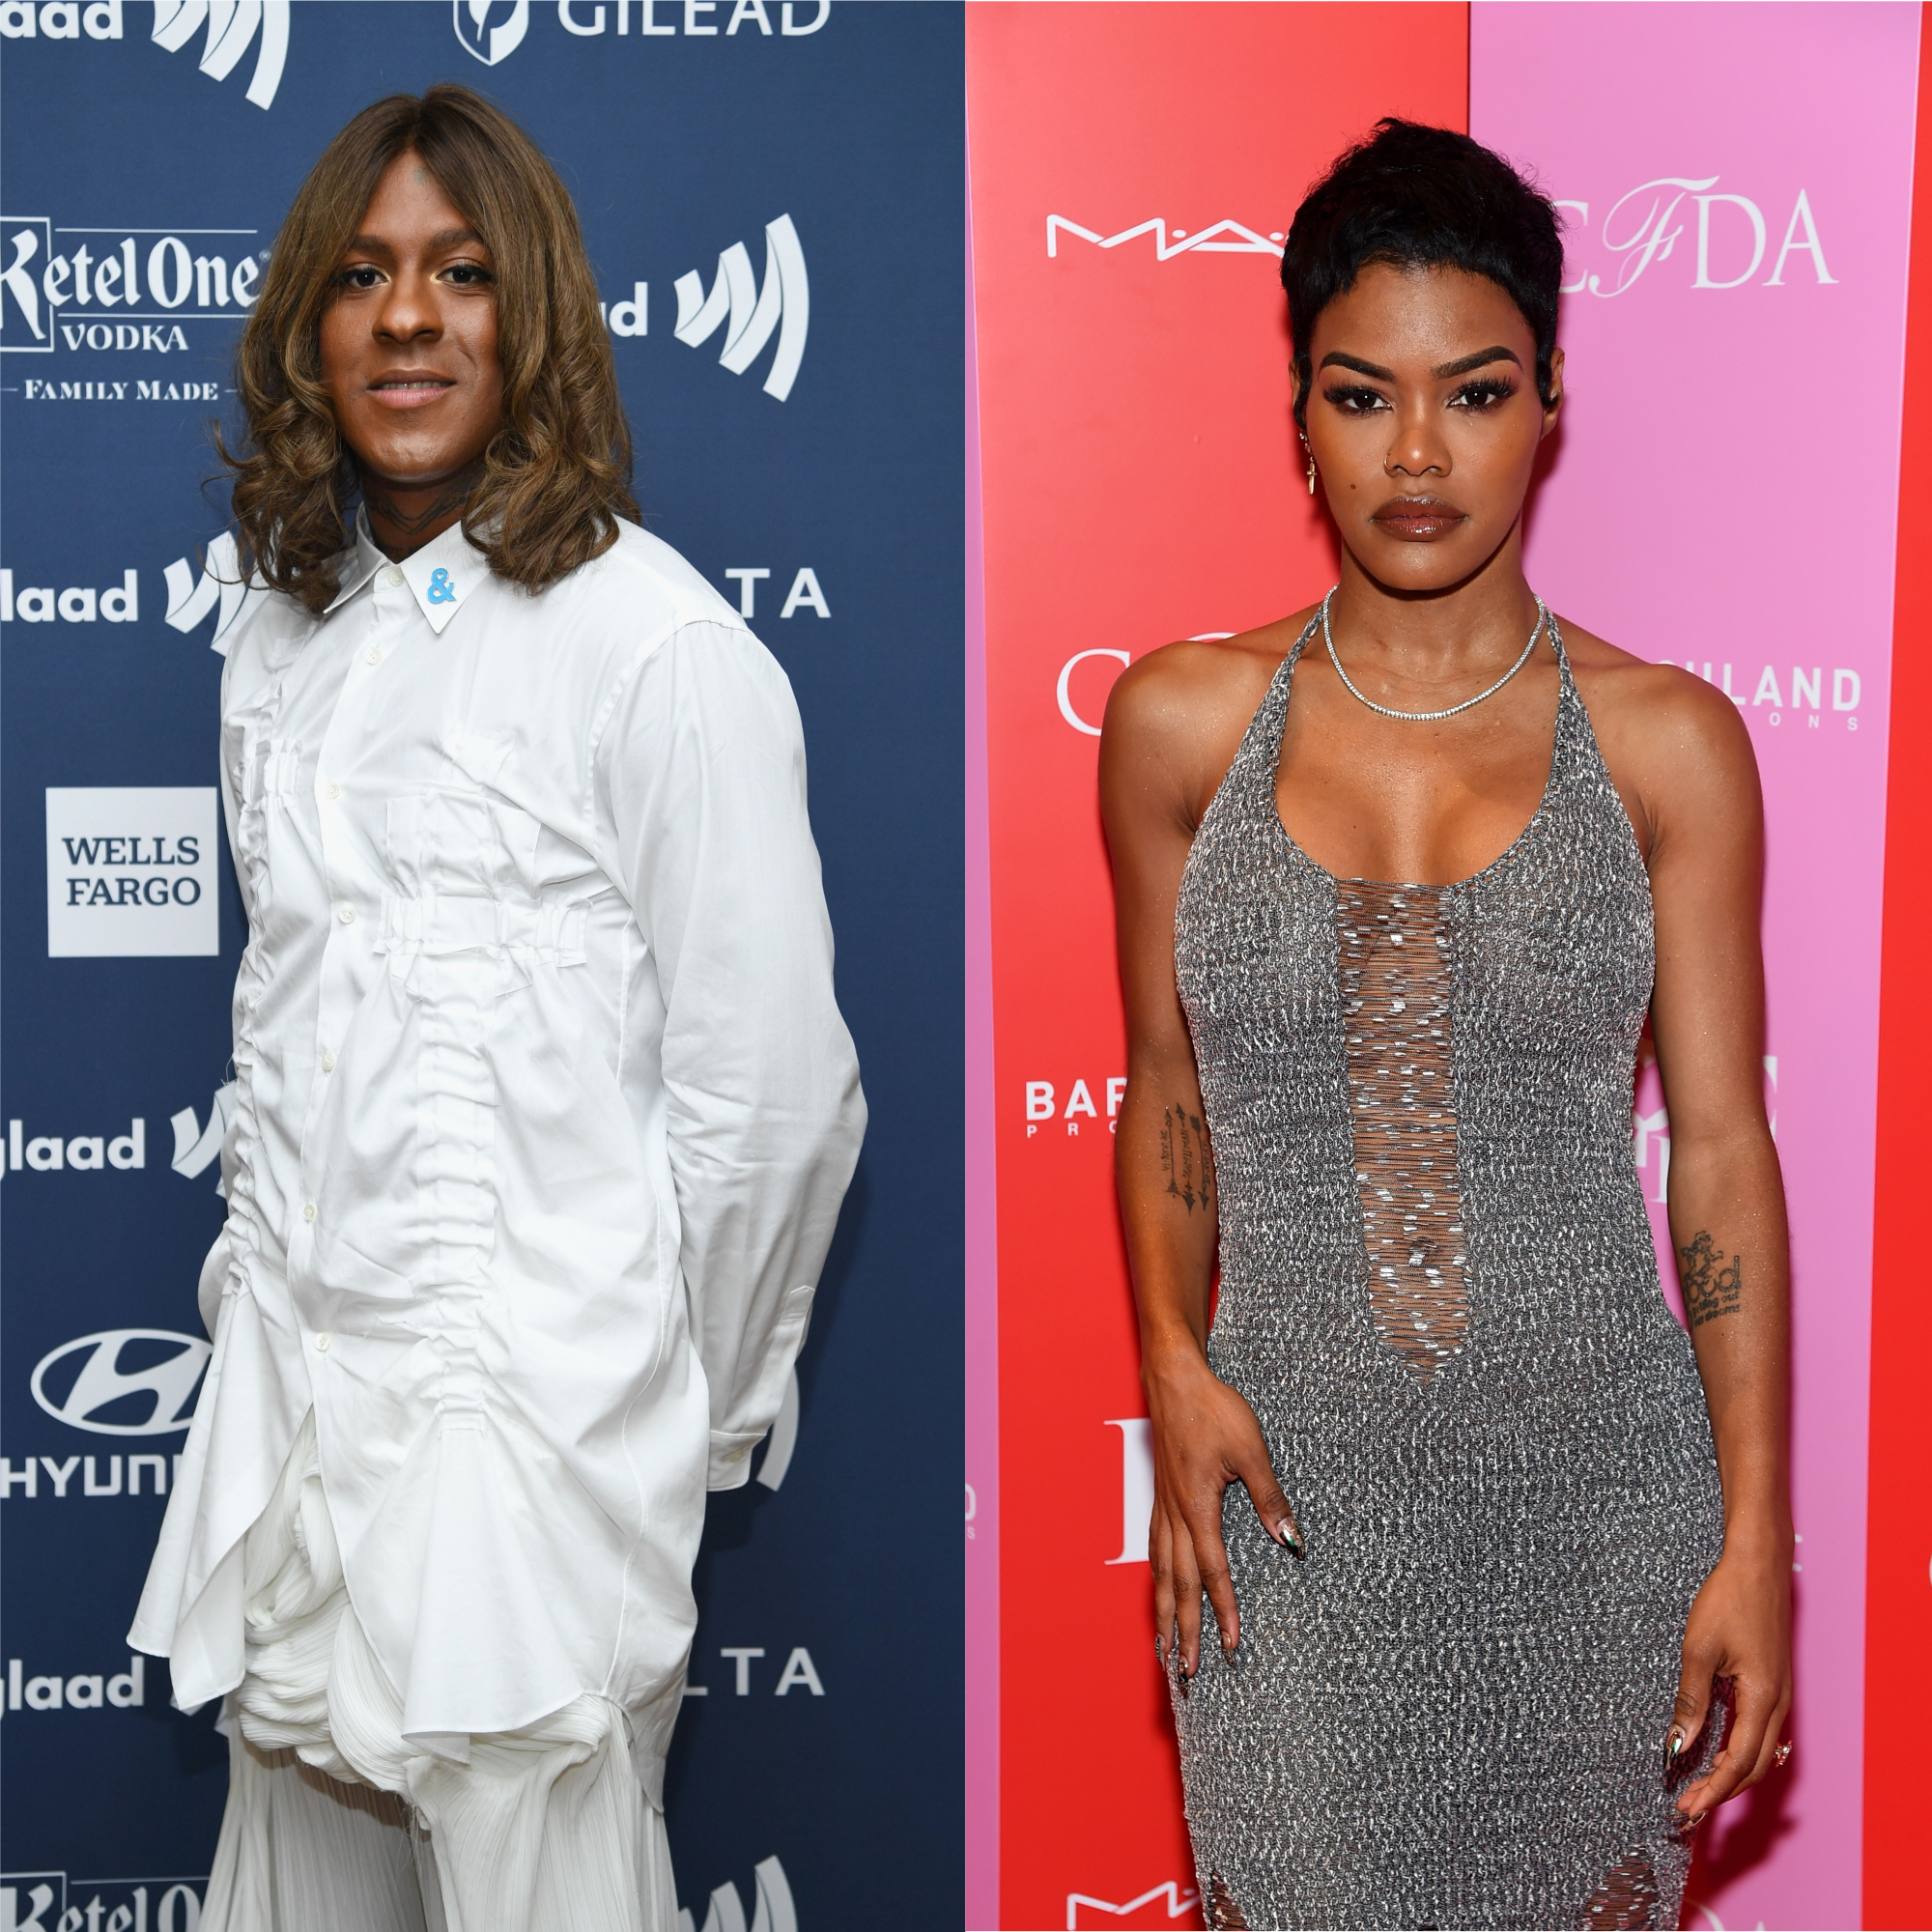 Mykki Blanco & Teyana Taylor Beef On Twitter Over Payment For “WTP” Feature